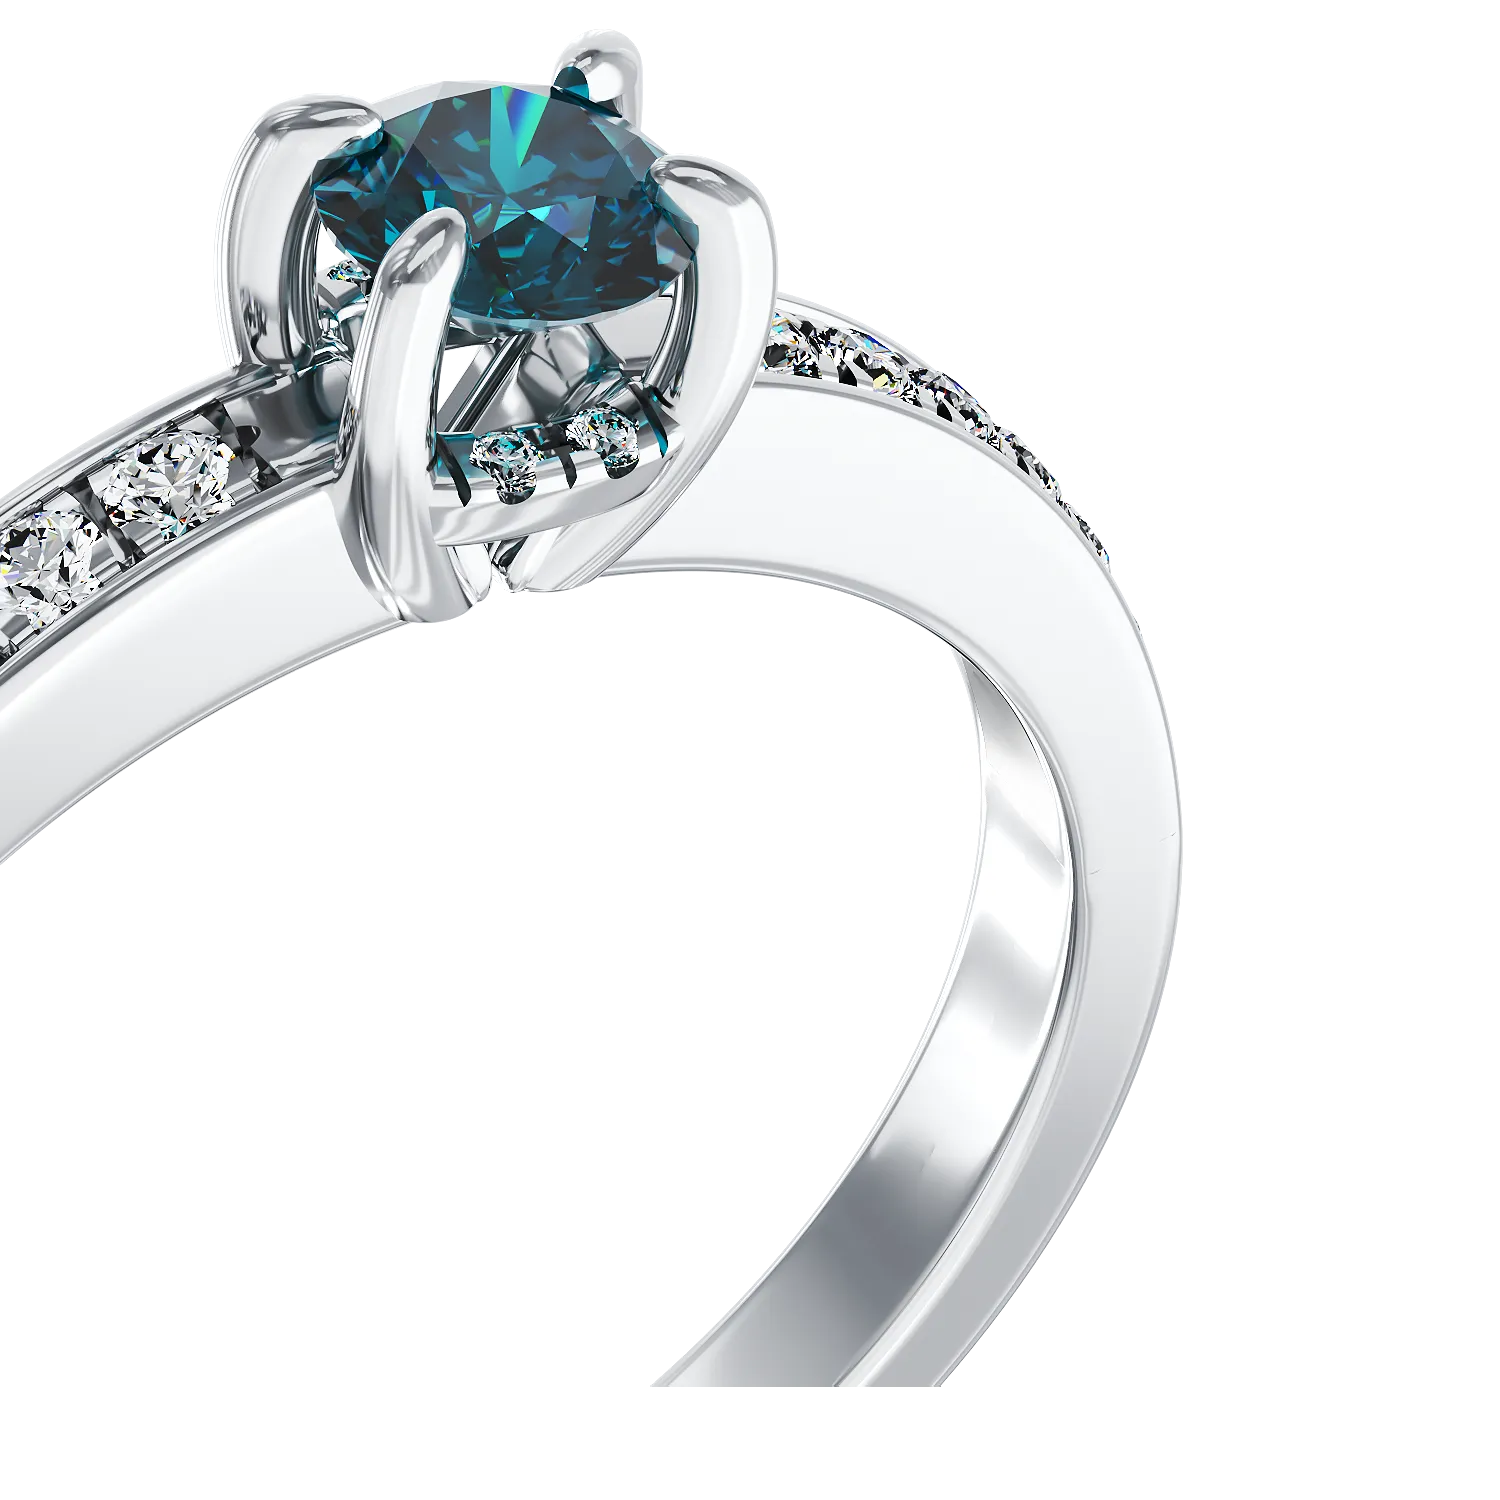 18K white gold engagement ring with 0.22ct blue diamond and 0.13ct diamonds